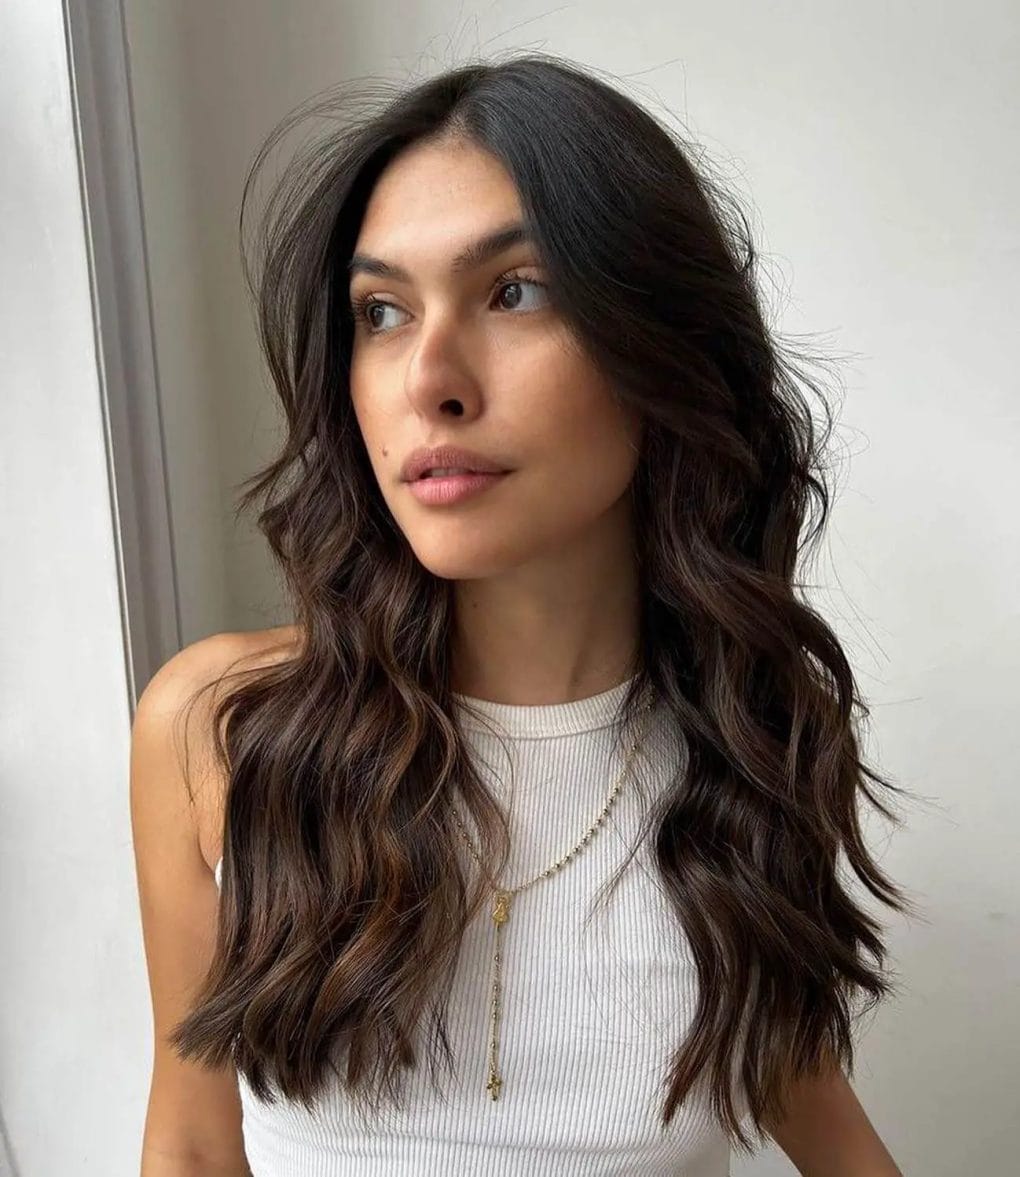 Butterfly Cut transforming straight hair into layered waves.